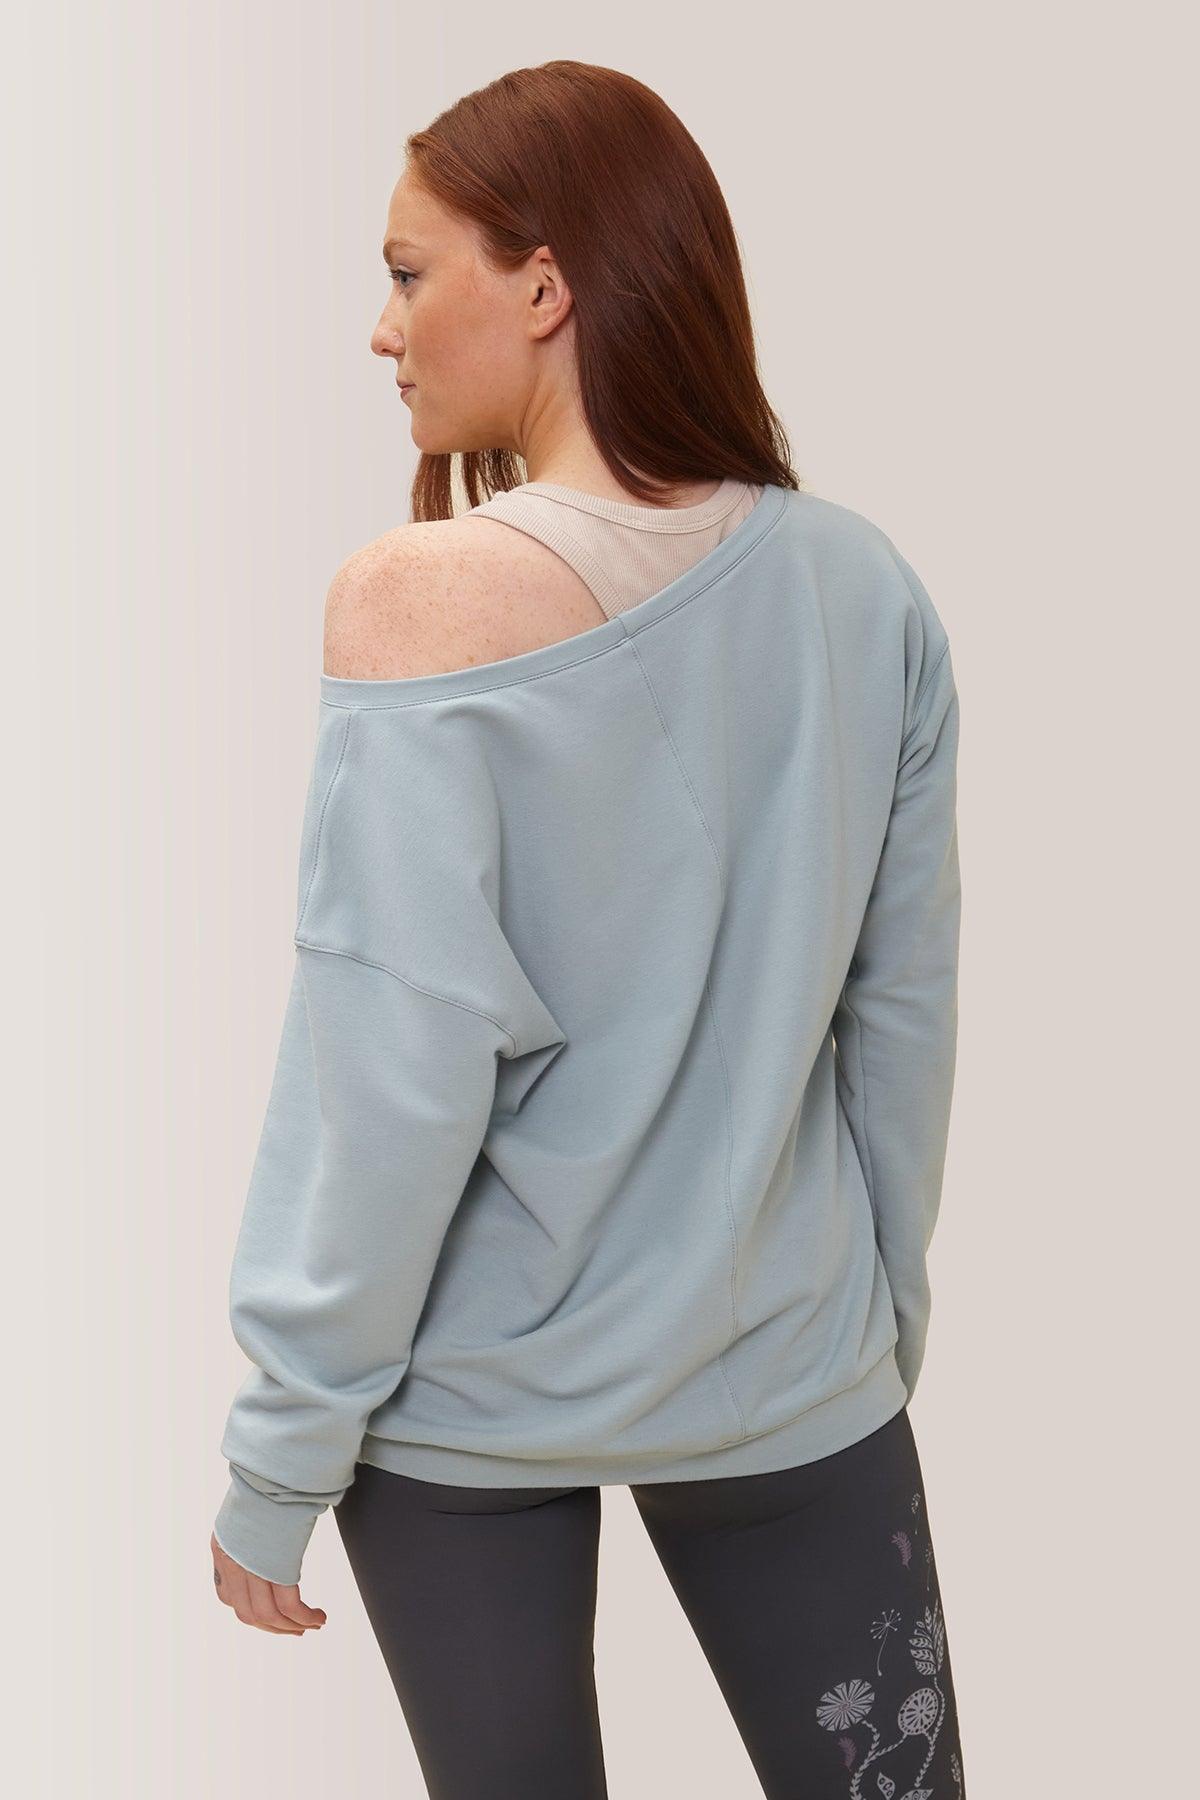 Femme qui porte le chandail Flashdance de Rose Boreal./ Women wearing the Flashdance pullover from Rose Boreal. - Lychen